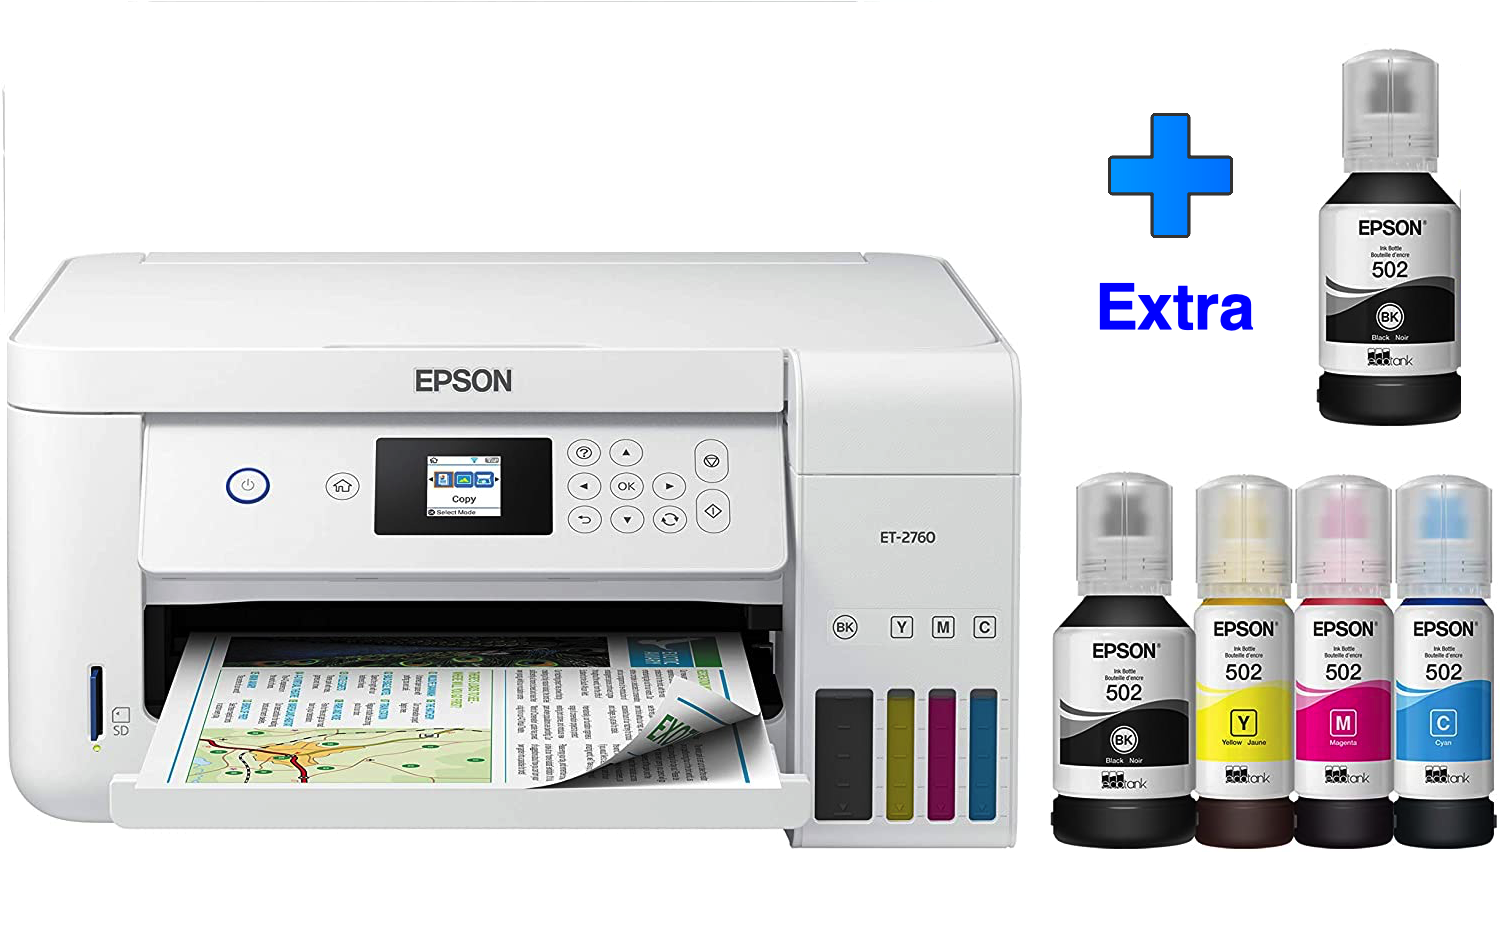 Epson EcoTank ET2760 Special Edition All-in-One Supertank Inkjet Color All-in-One, Printer, Scan, Copy, WiFi and USB - image 1 of 8